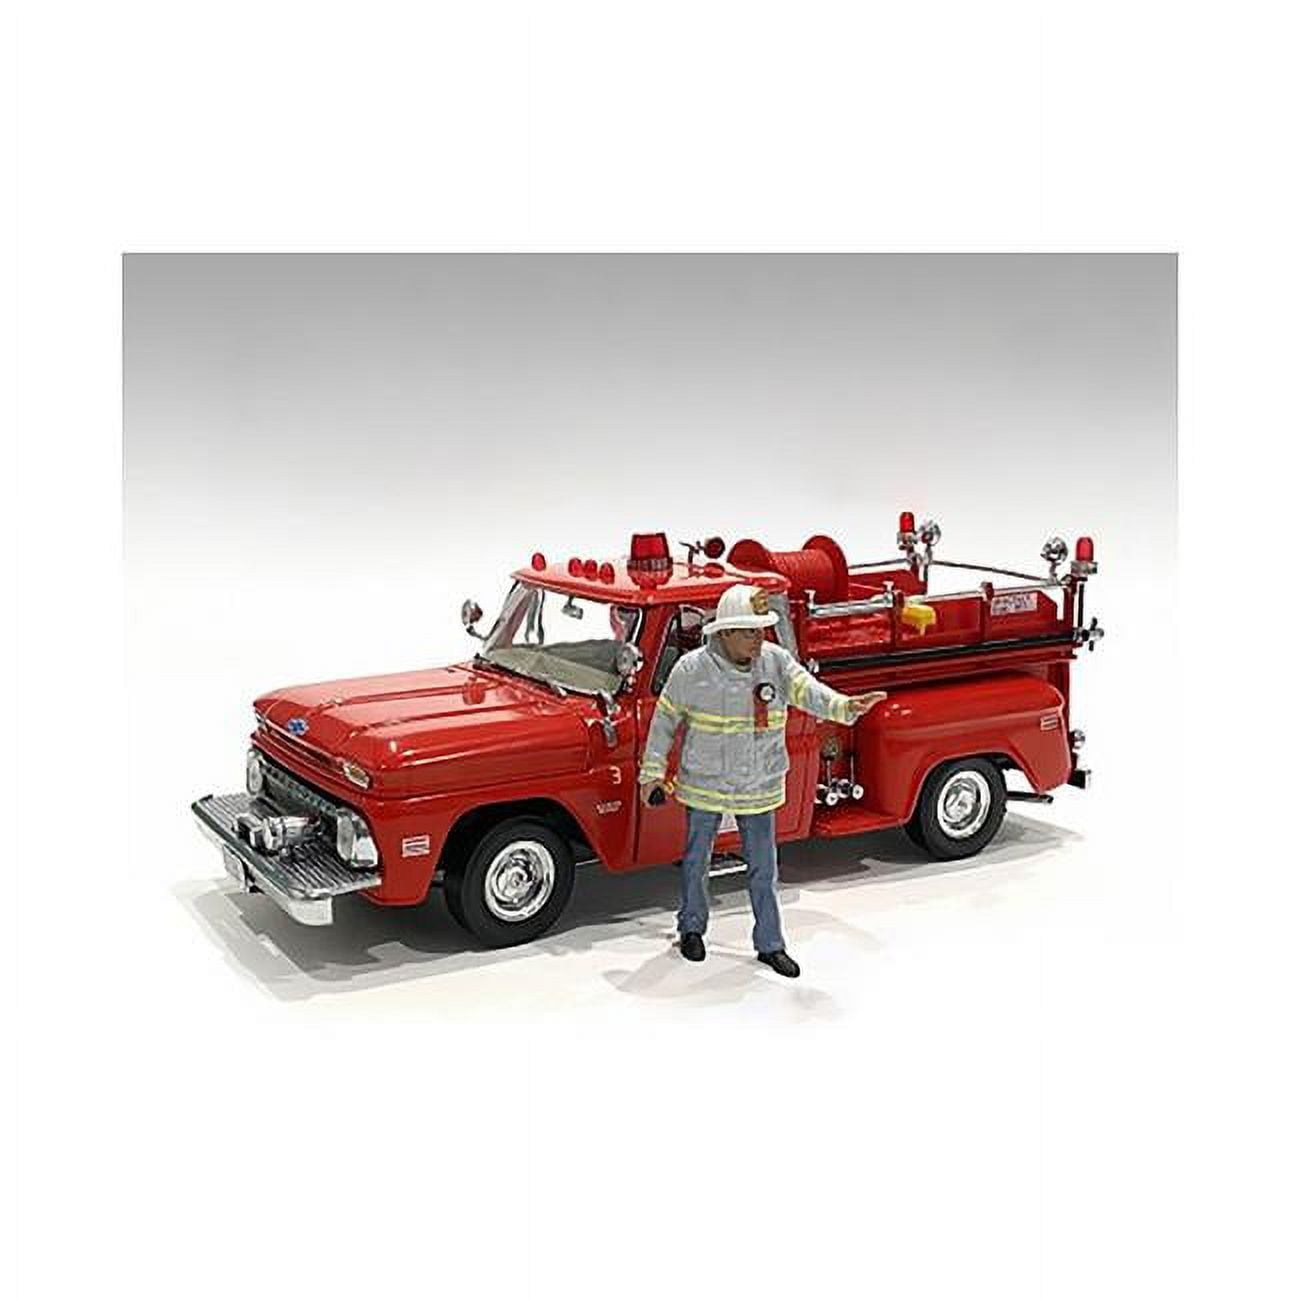 Picture of American Diorama AD76318 Firefighters Fire Captain Figure for 1 by 18 Scale Models